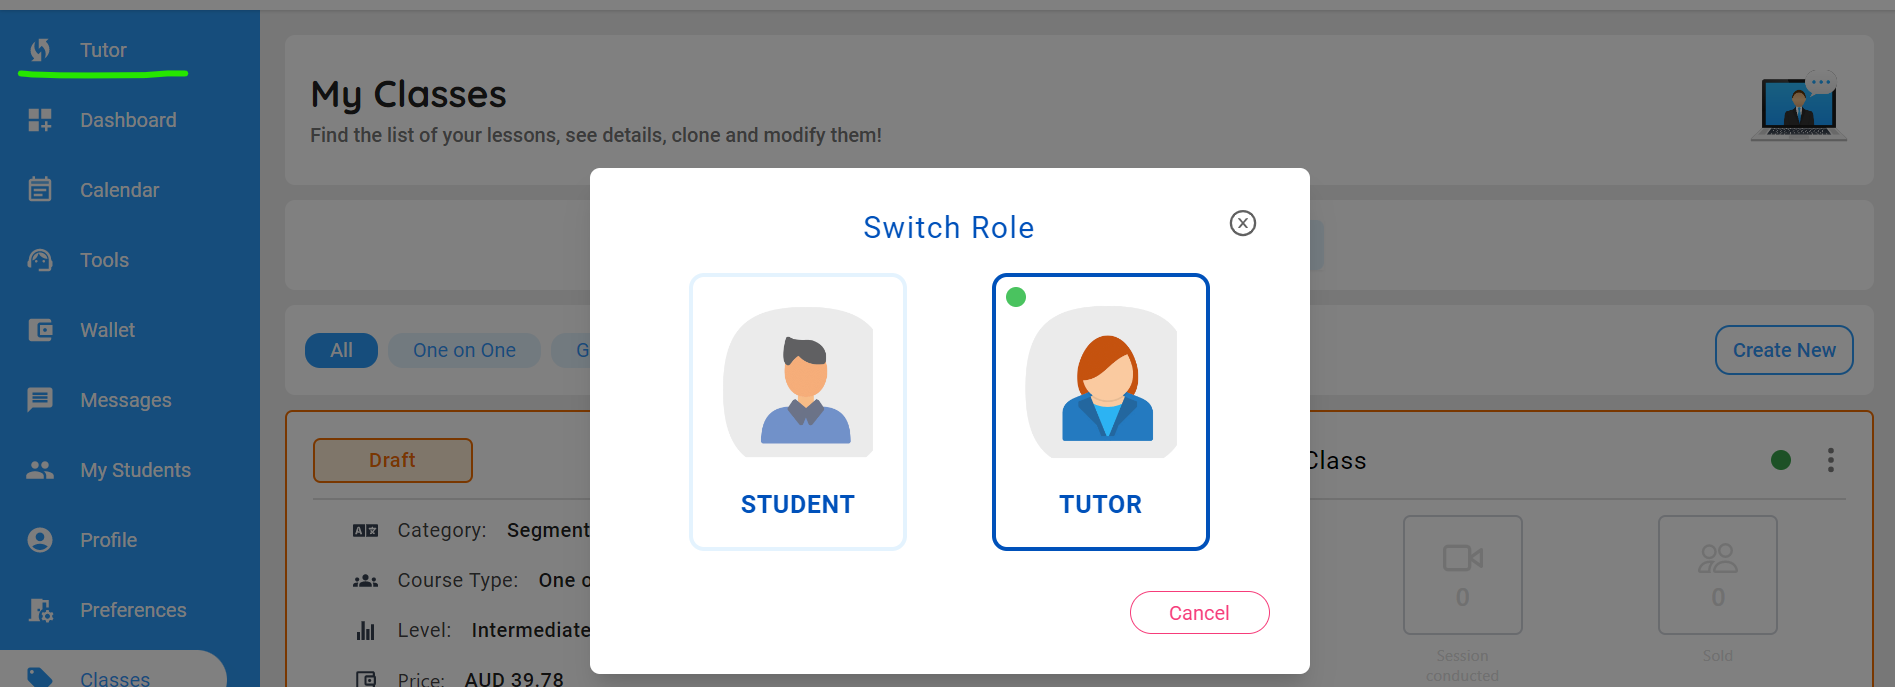 Switch to Tutor Role - see menu